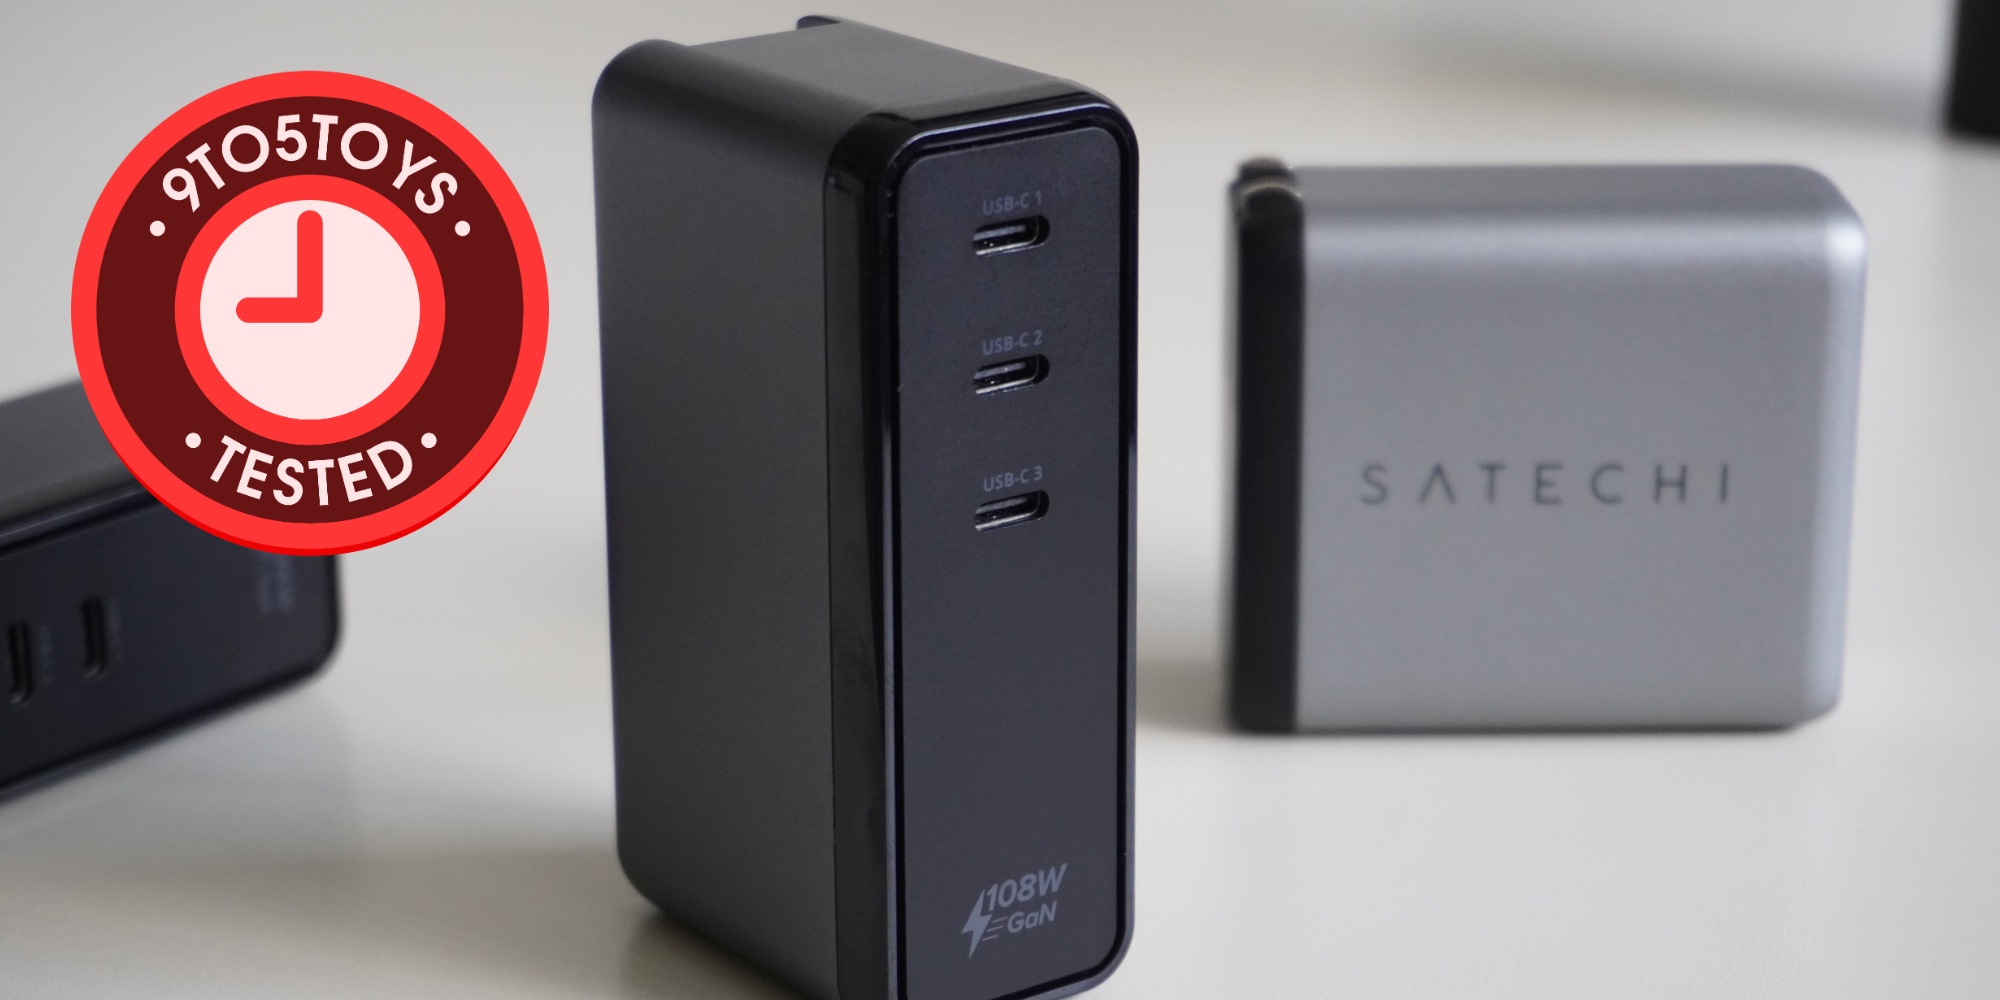 Jeg klager fordrejer Mansion Satechi GaN USB-C charger hands-on: Pricy and premium - 9to5Toys